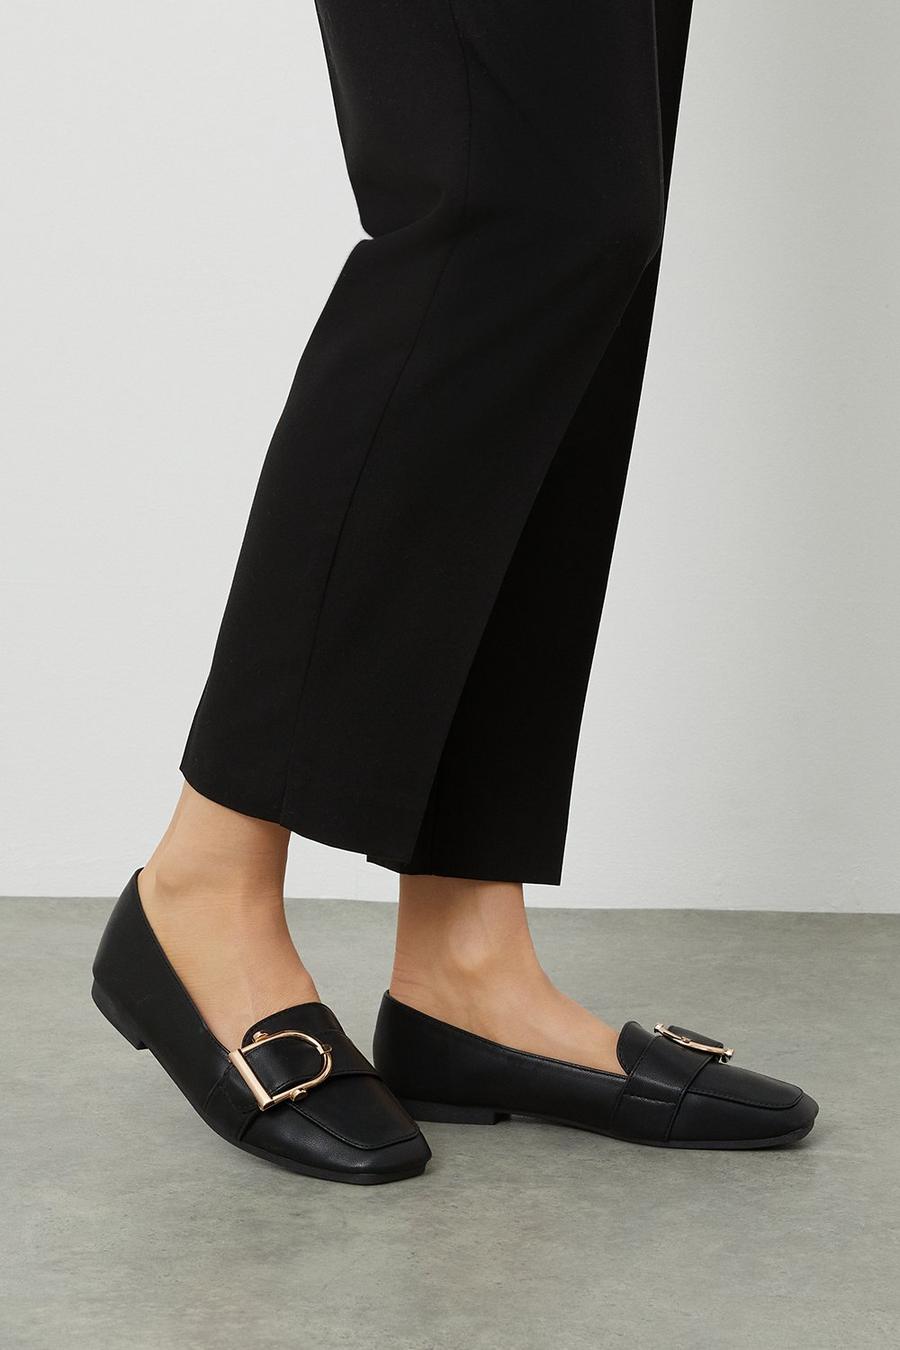 Libby Comfort Trim Loafers